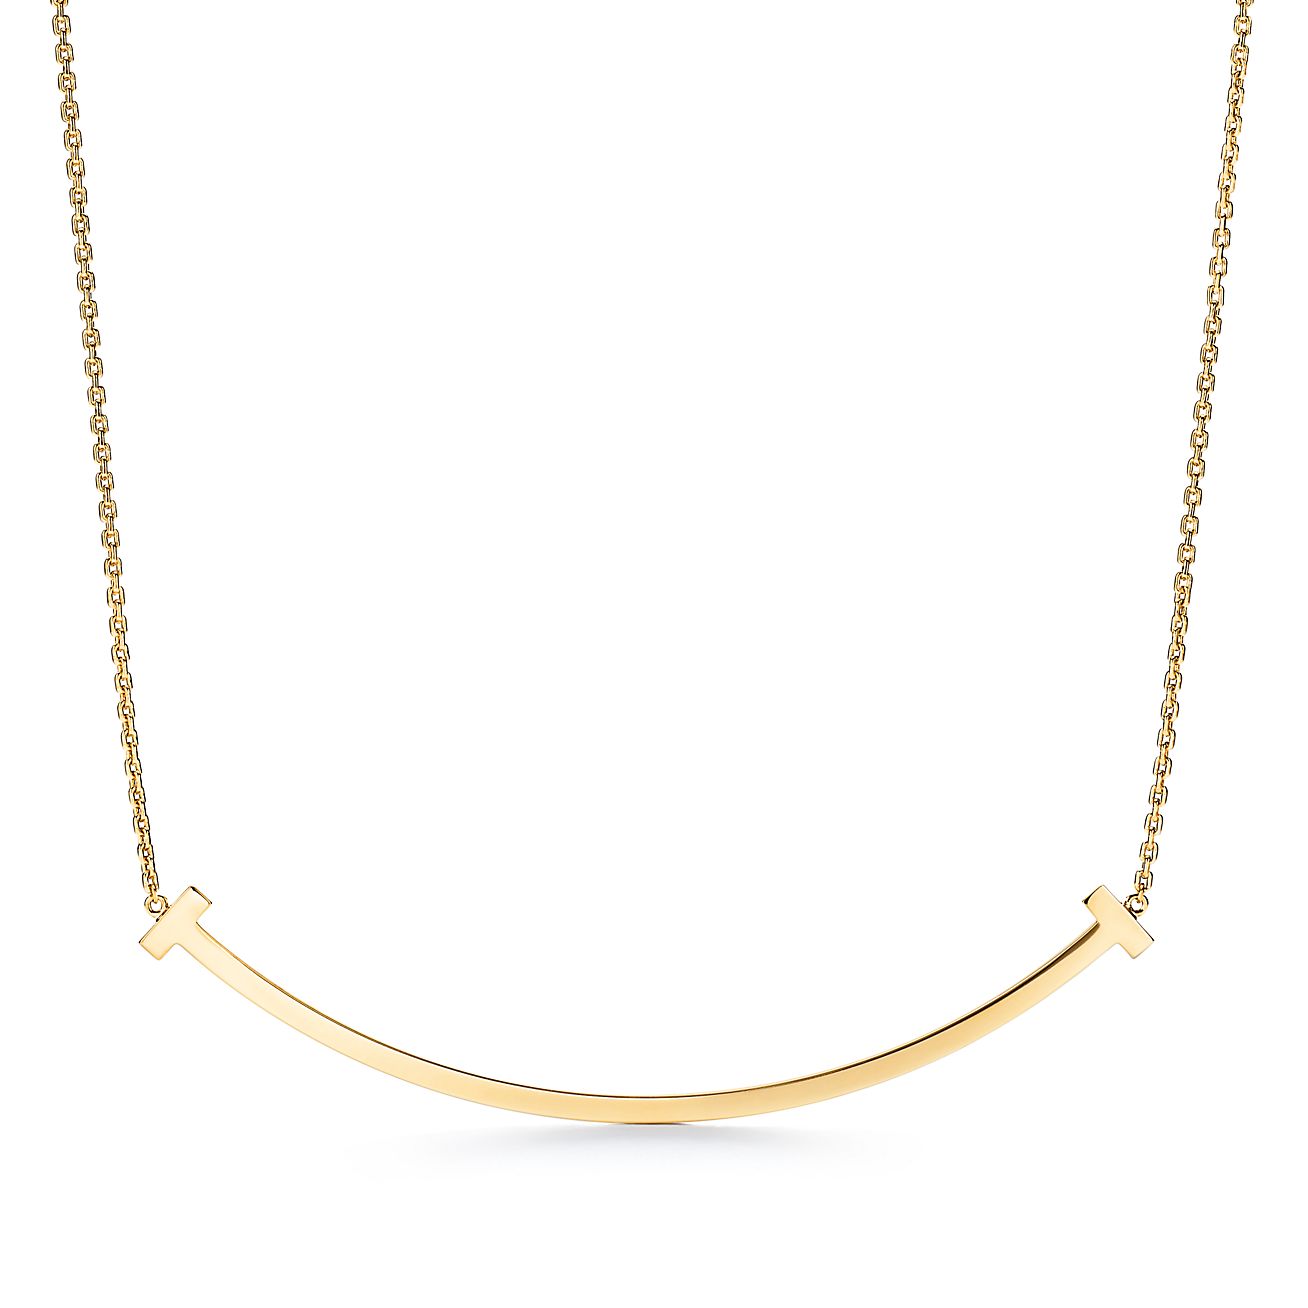 Tiffany T Extra Large Smile Pendant in 18k Gold